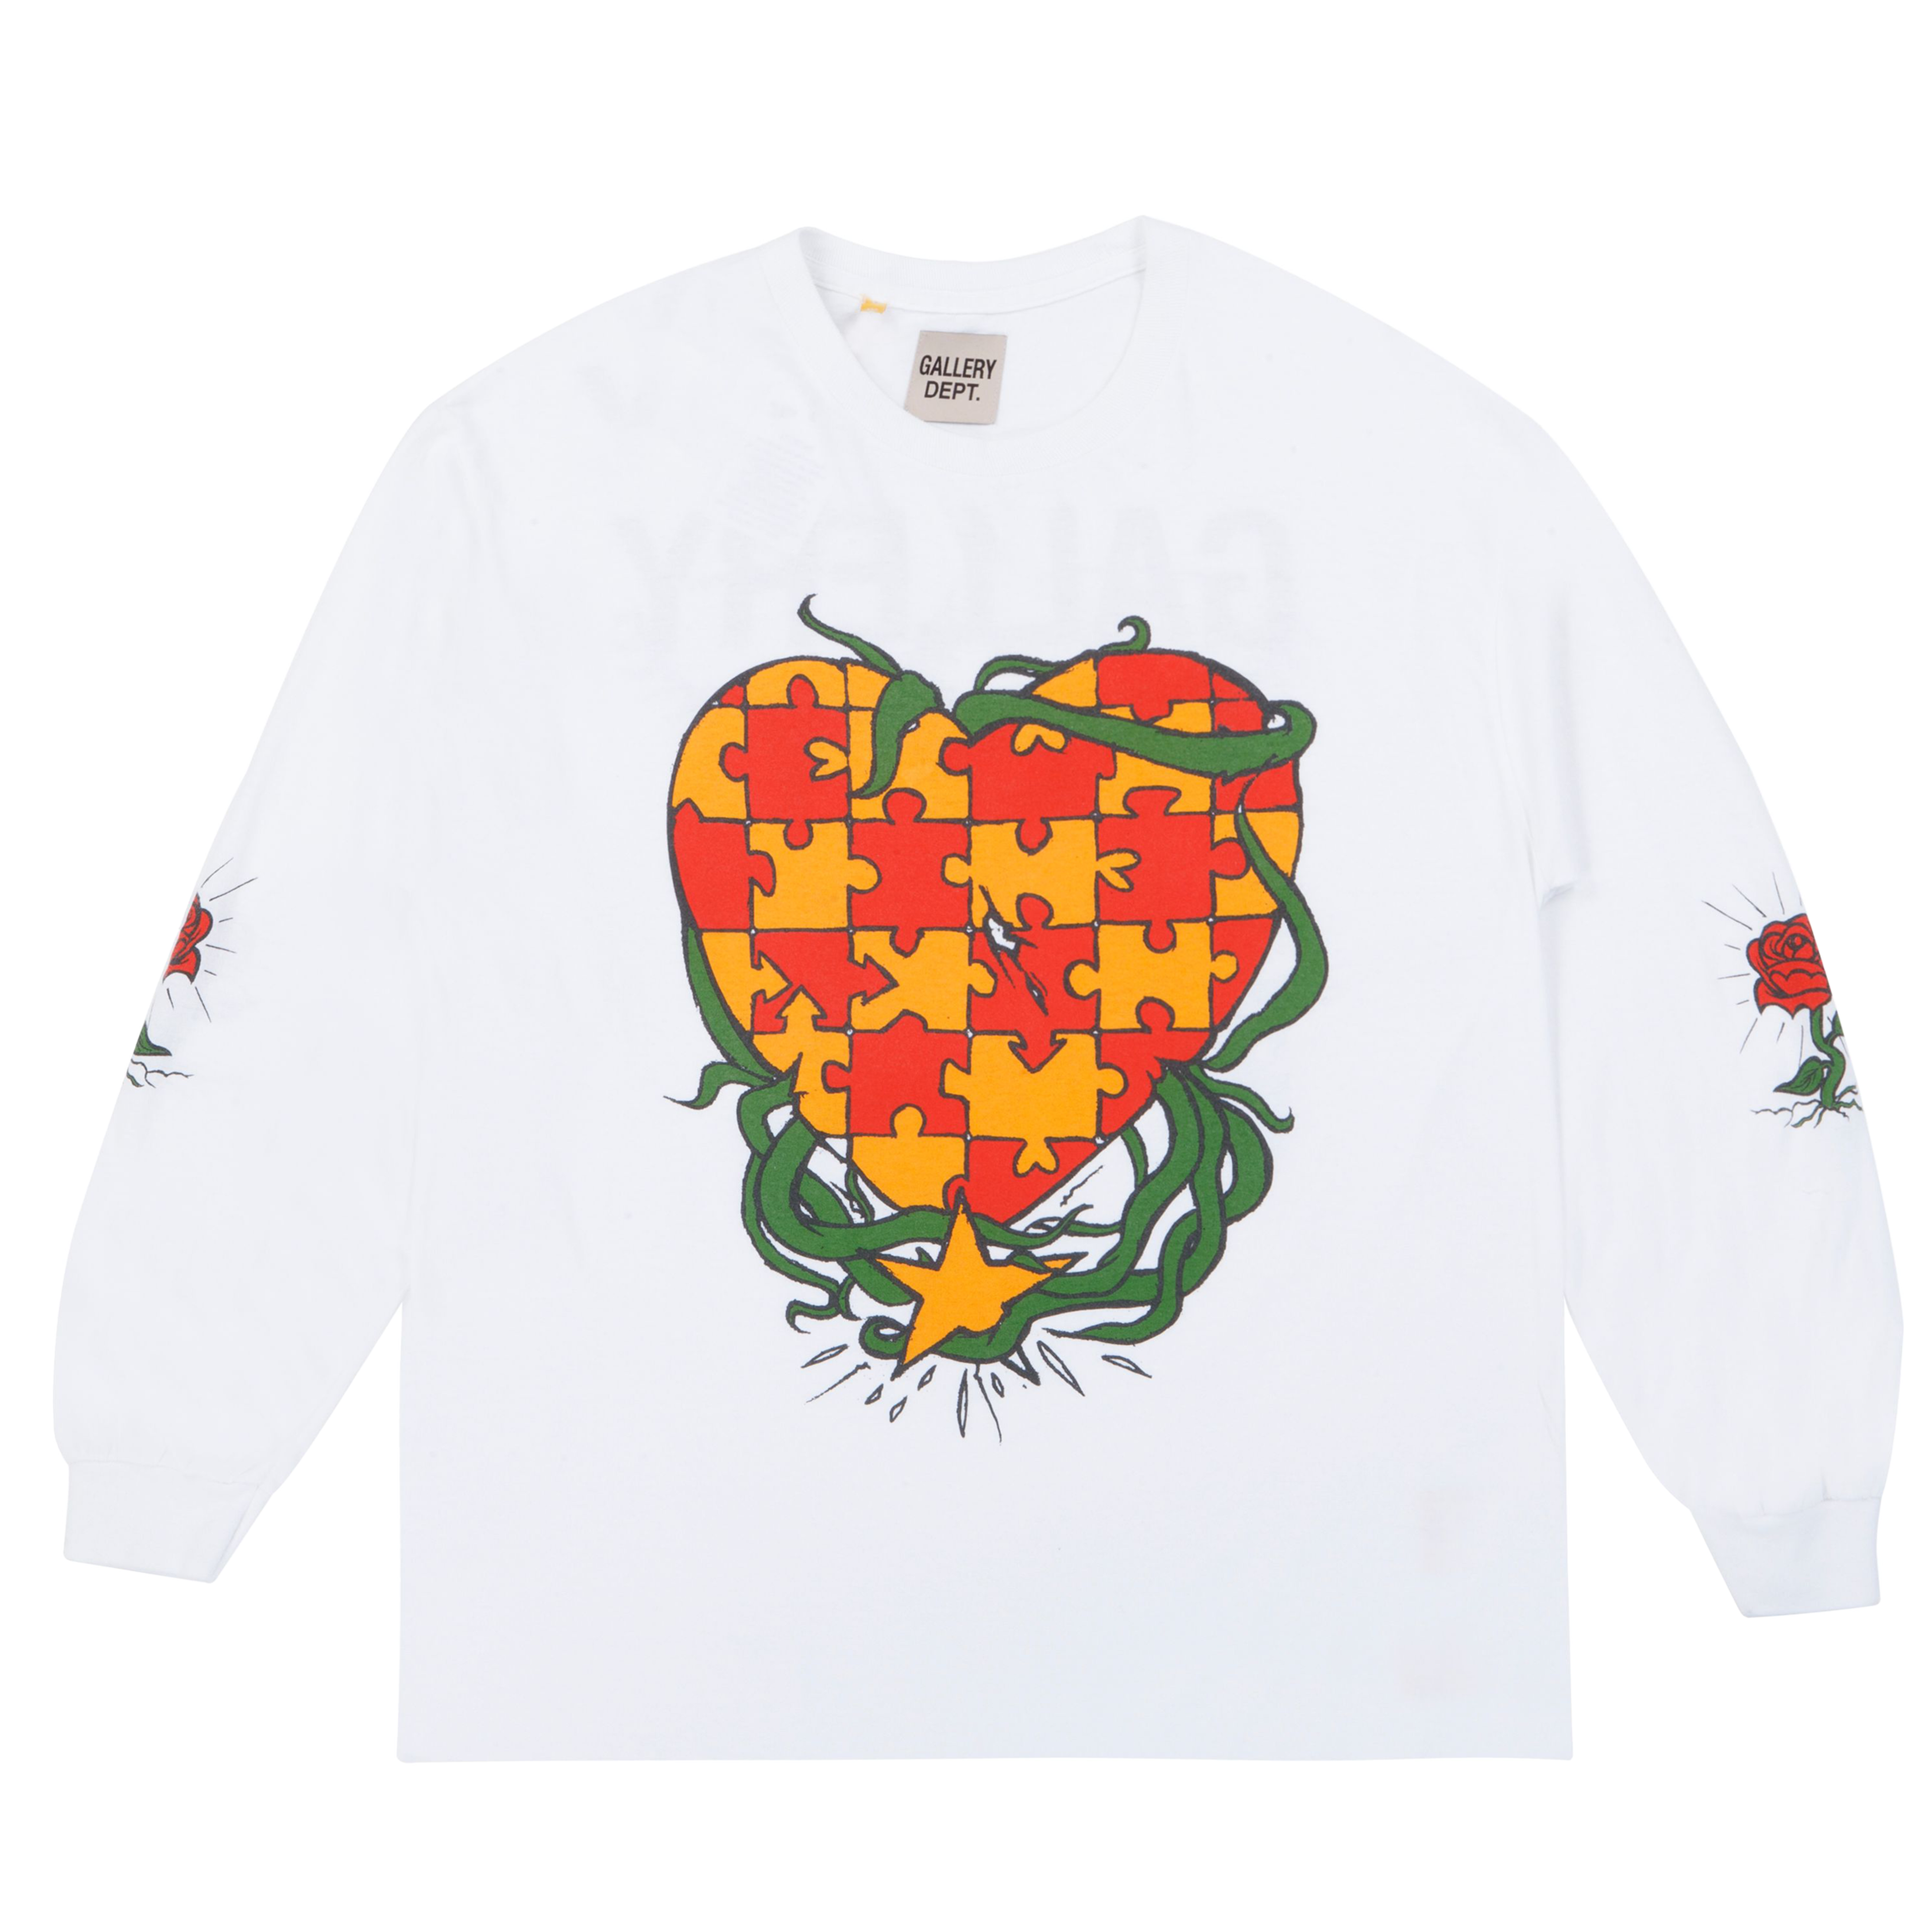 Gallery Dept. Puzzle Heart Long sleeve White